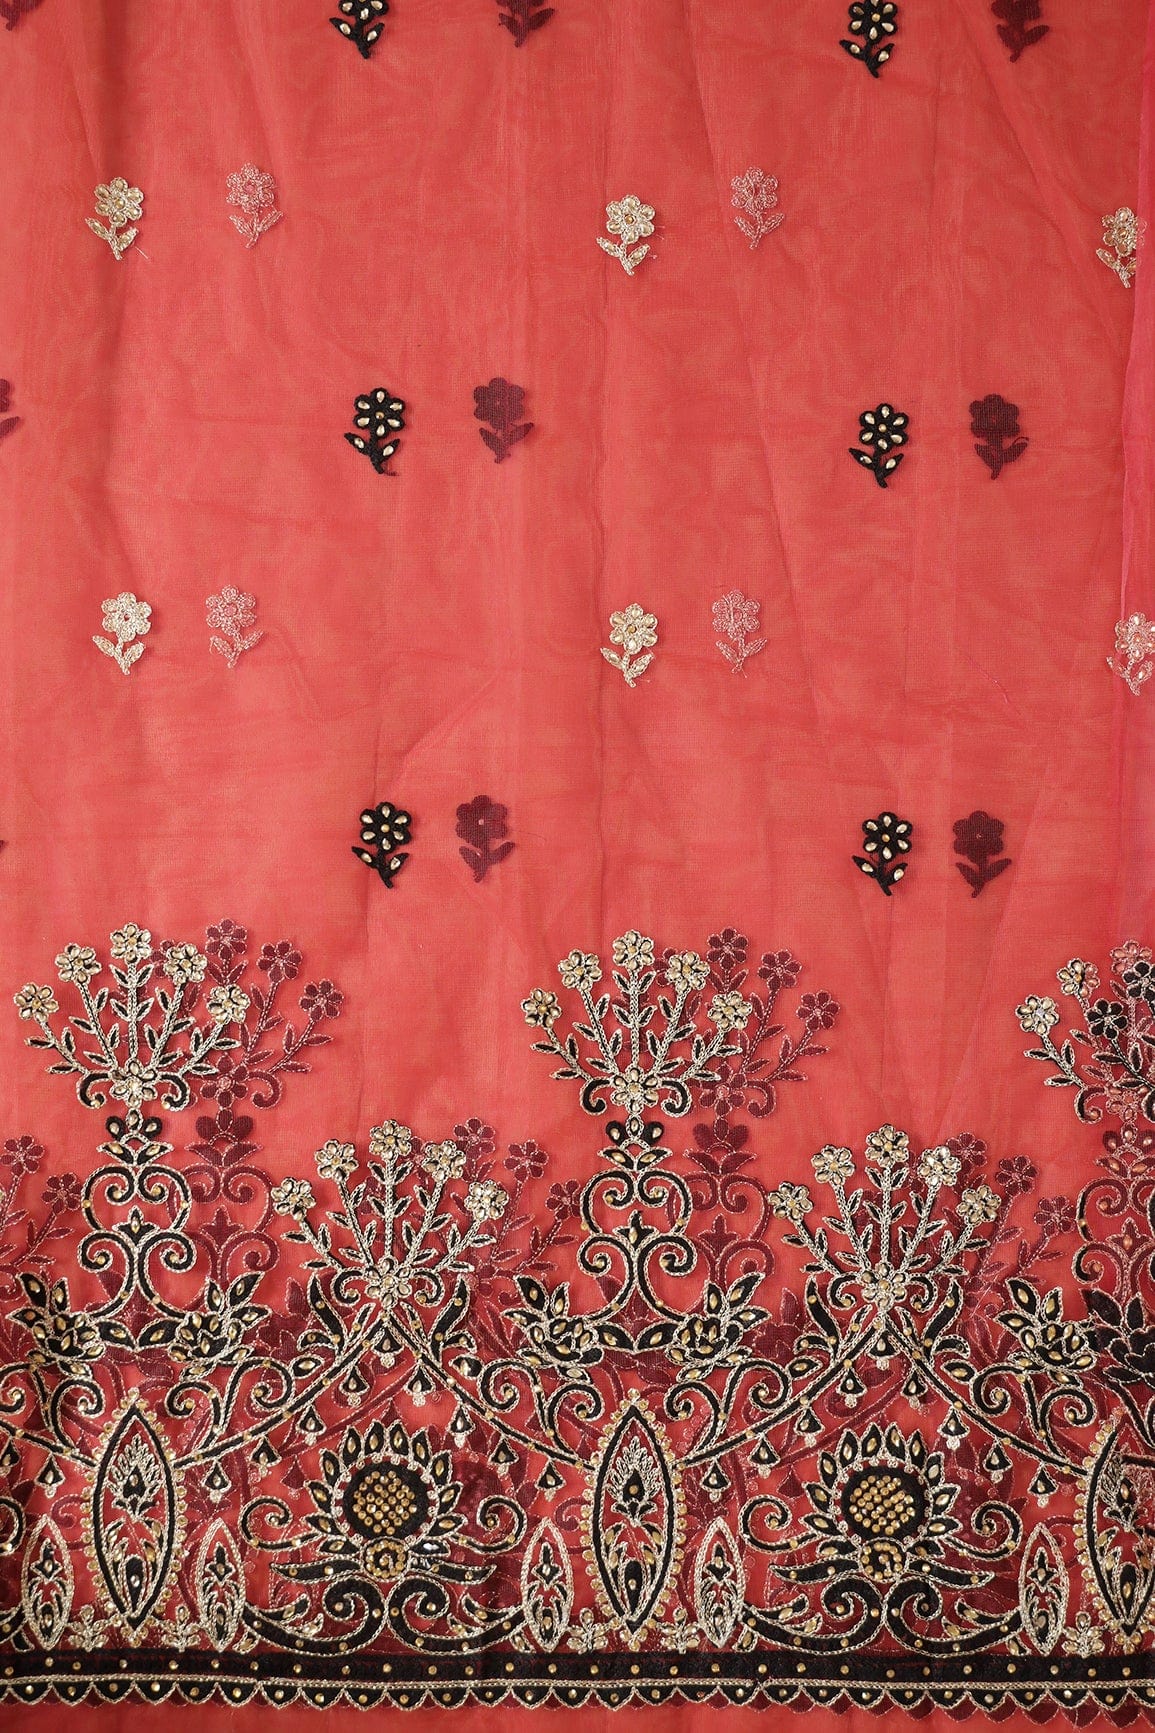 doeraa Embroidery Fabrics 1 Meter Cut Piece Of Gold Zari With Black Thread Border Embroidery Work On Red Soft Net Fabric